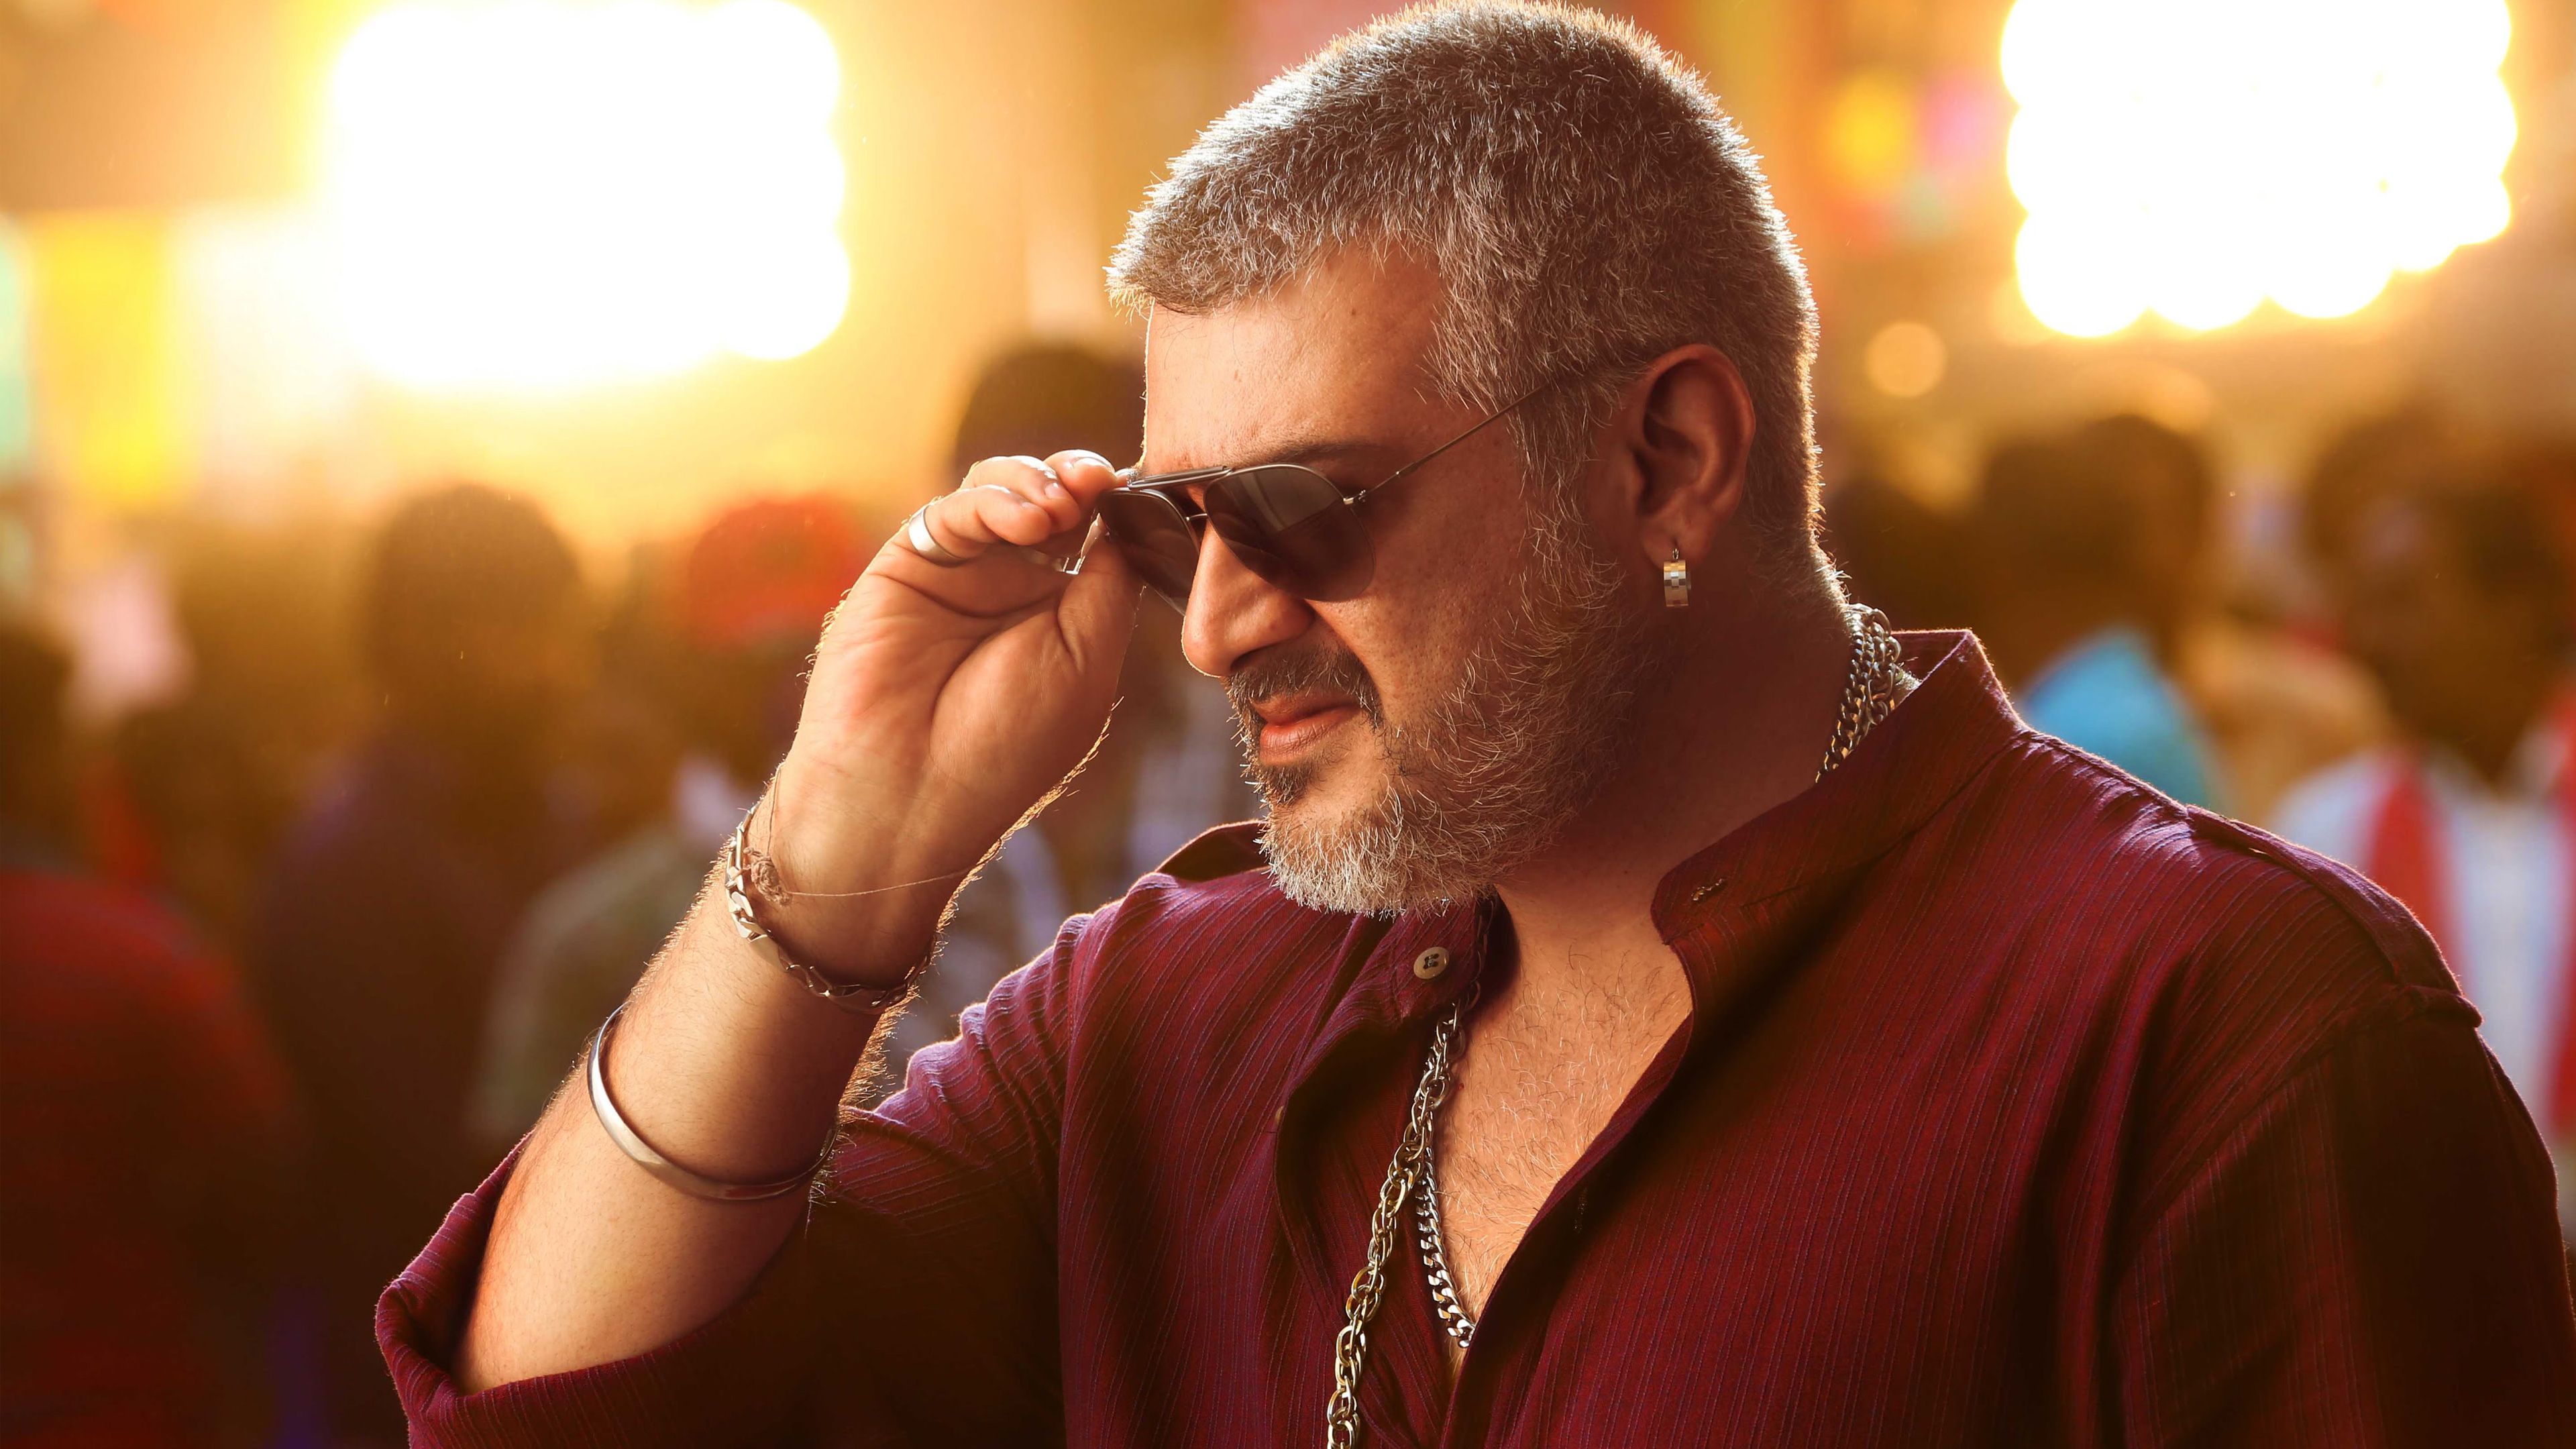 Ajith 4K wallpaper for your desktop or mobile screen free and easy to download